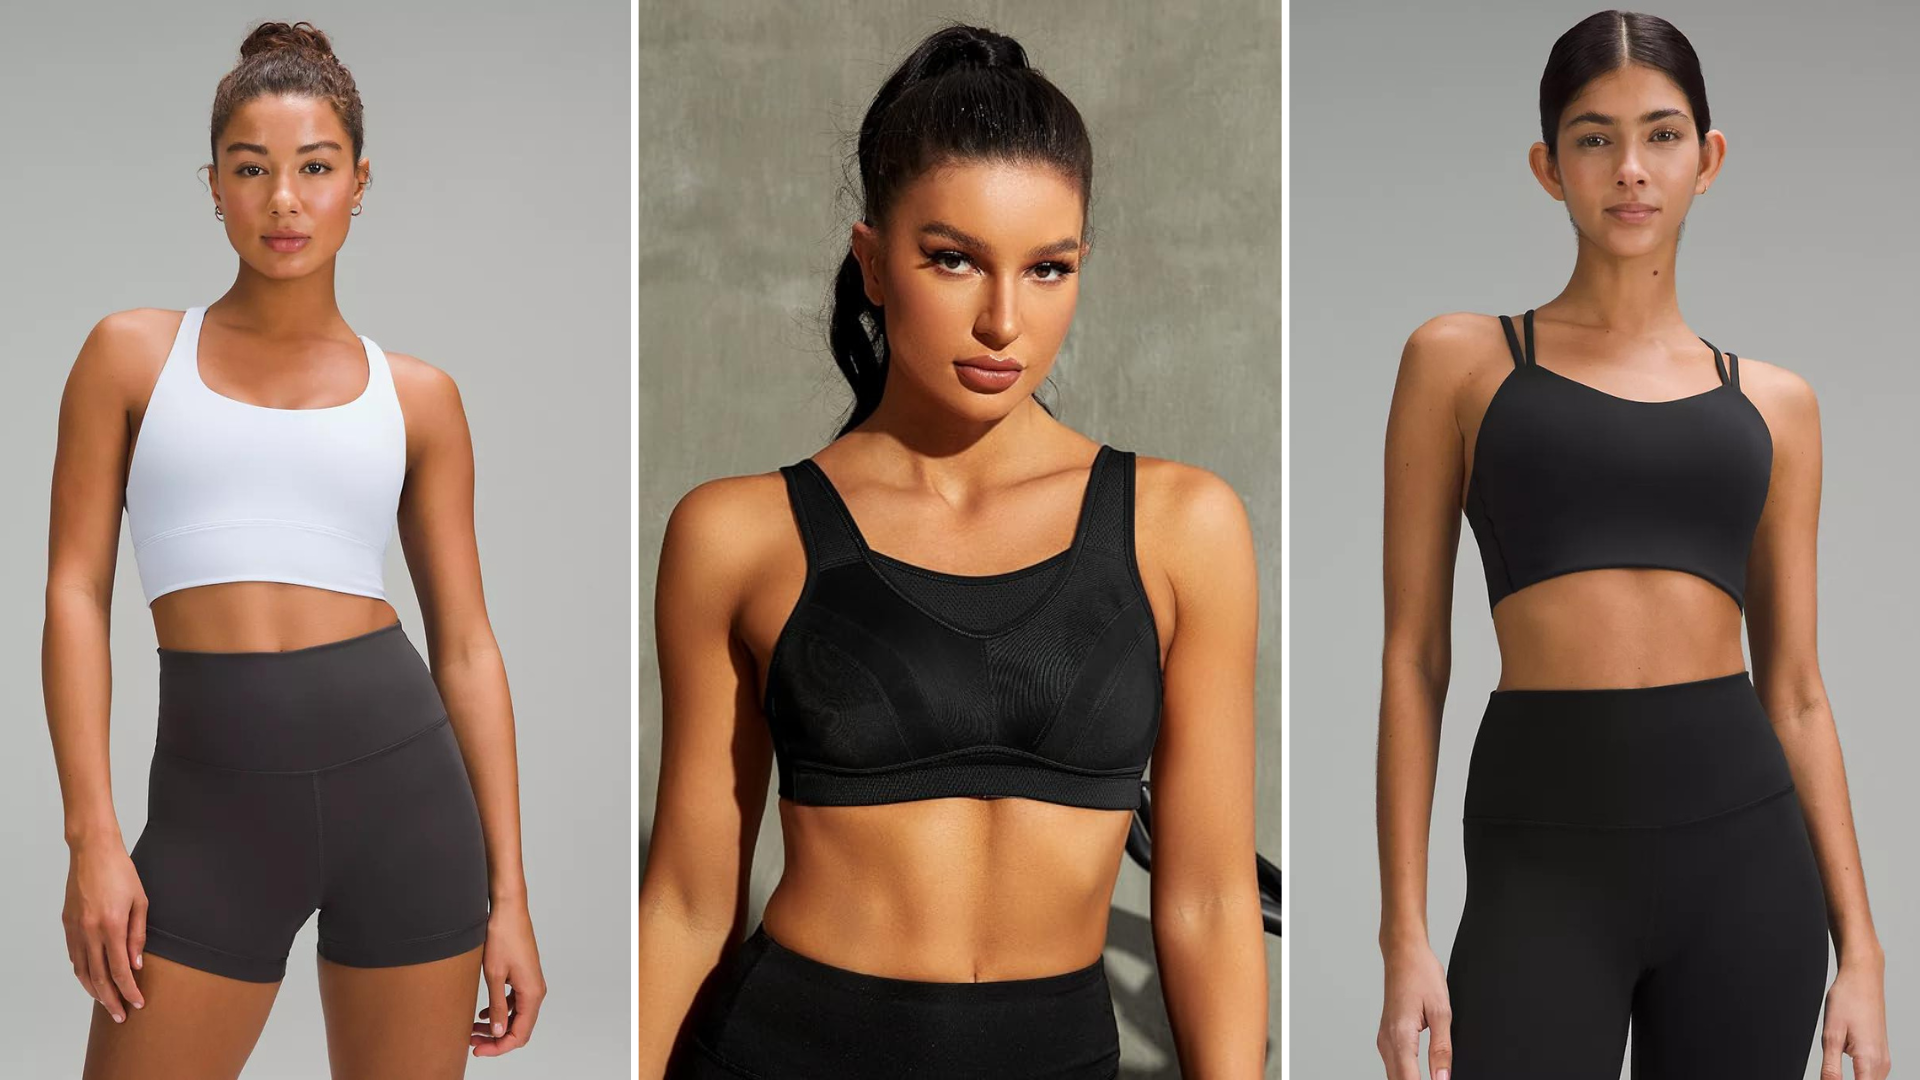 If You're Looking To Up Your Gym Game, You'll Want To Order One Of These Sports  Bras